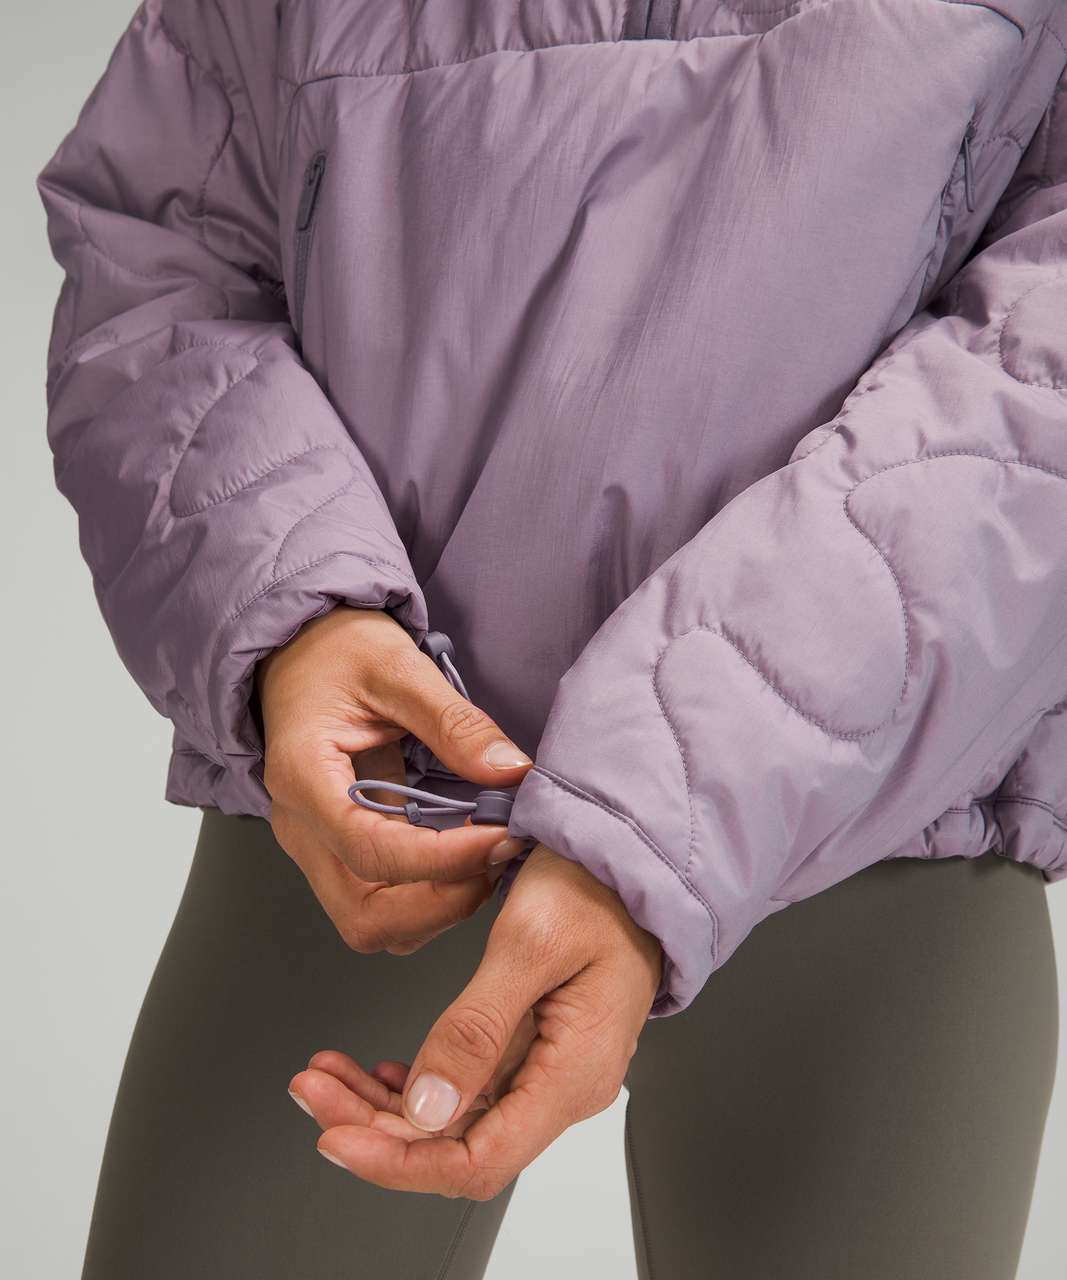 Lululemon Insulated Quilted Pullover Jacket - Heathered Dusky Lavender